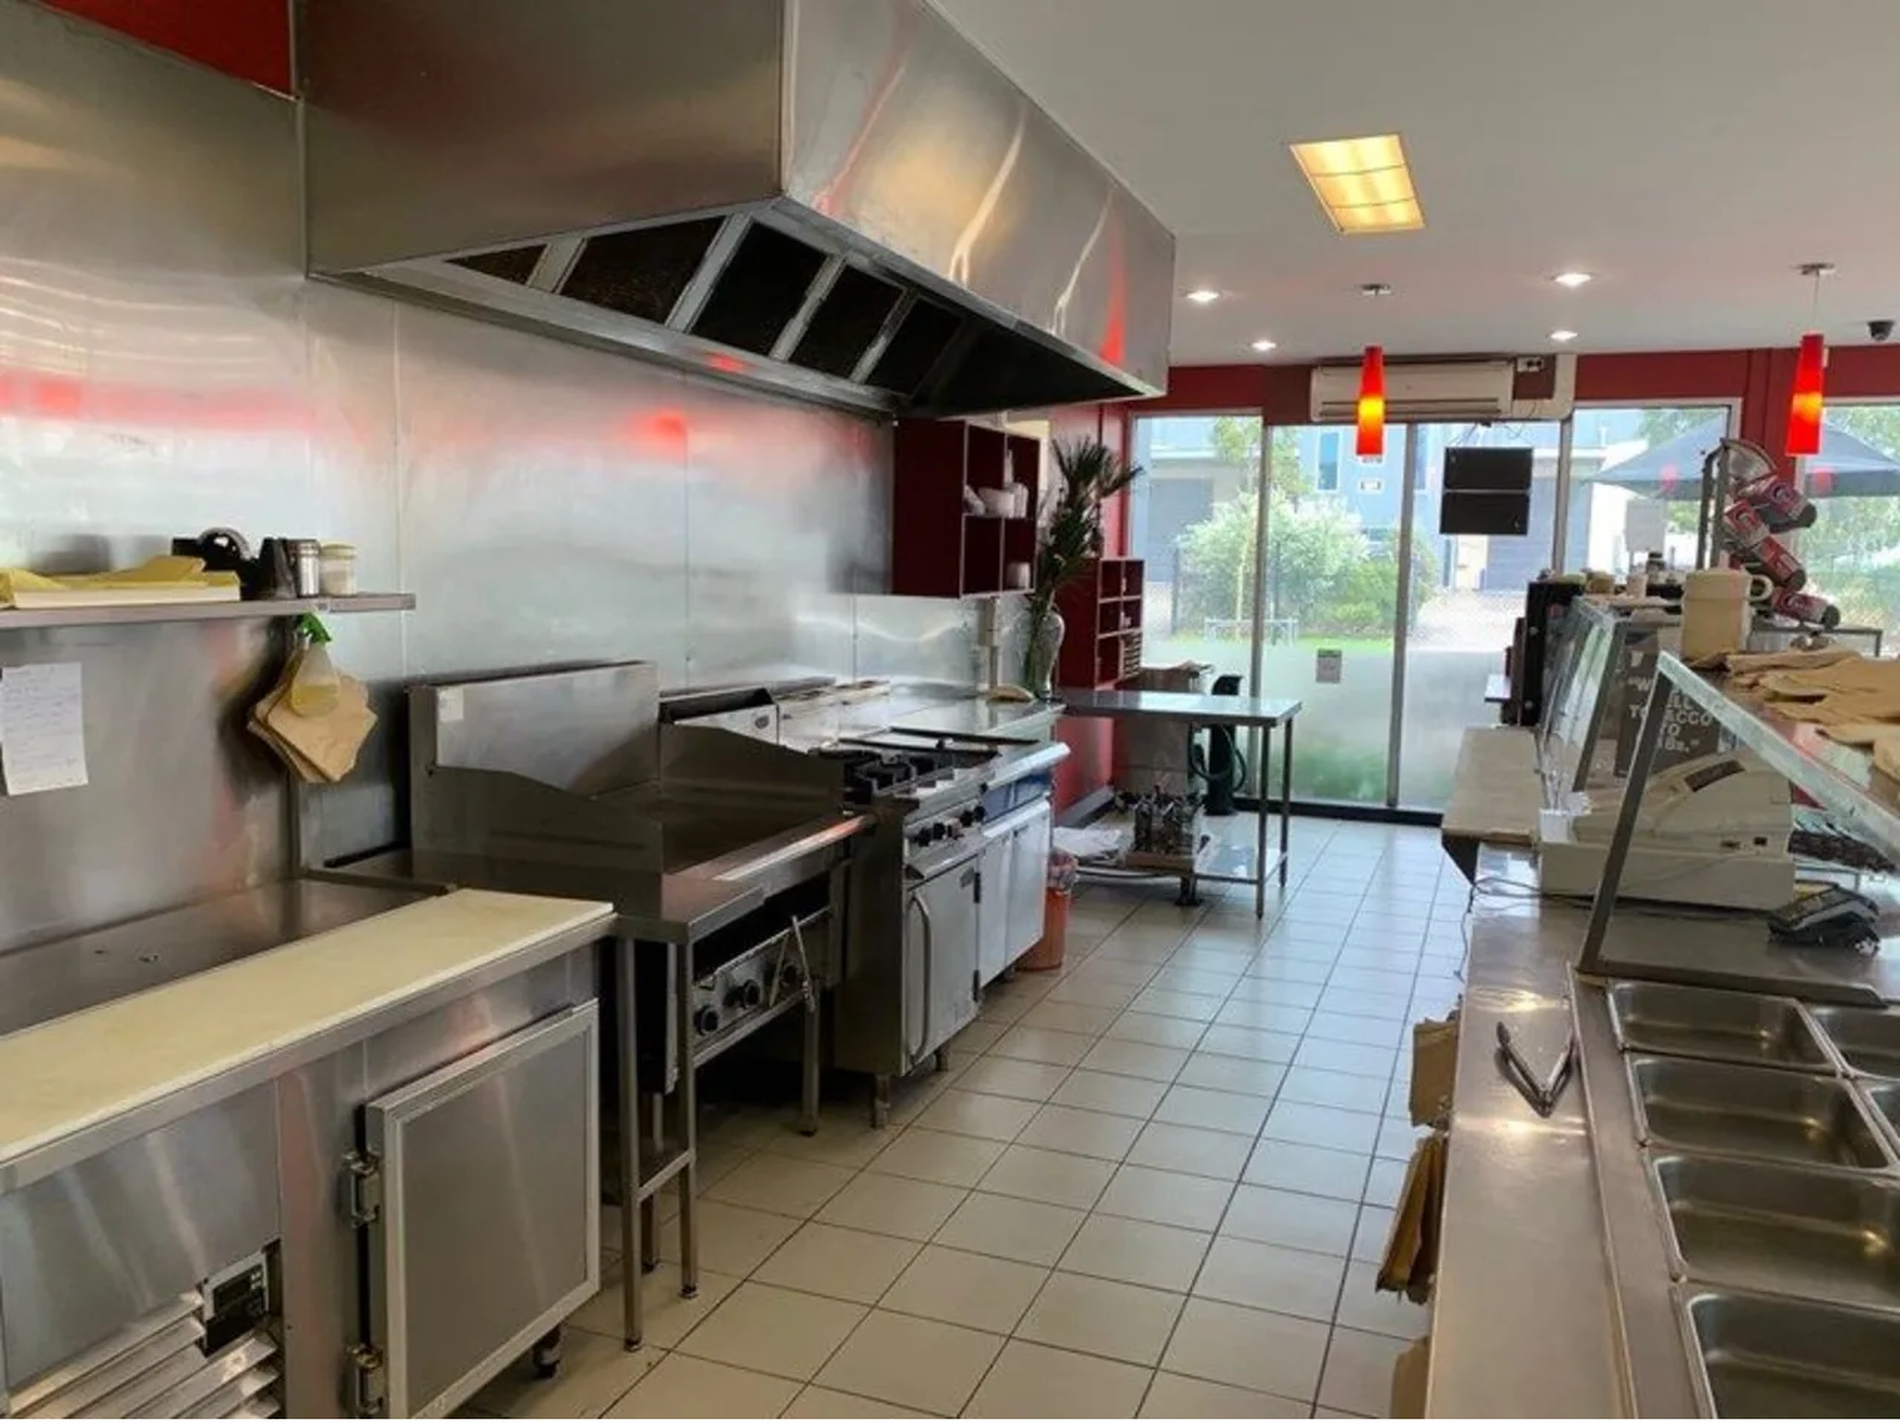 5 Day Industrial Cafe Business For Sale in the West